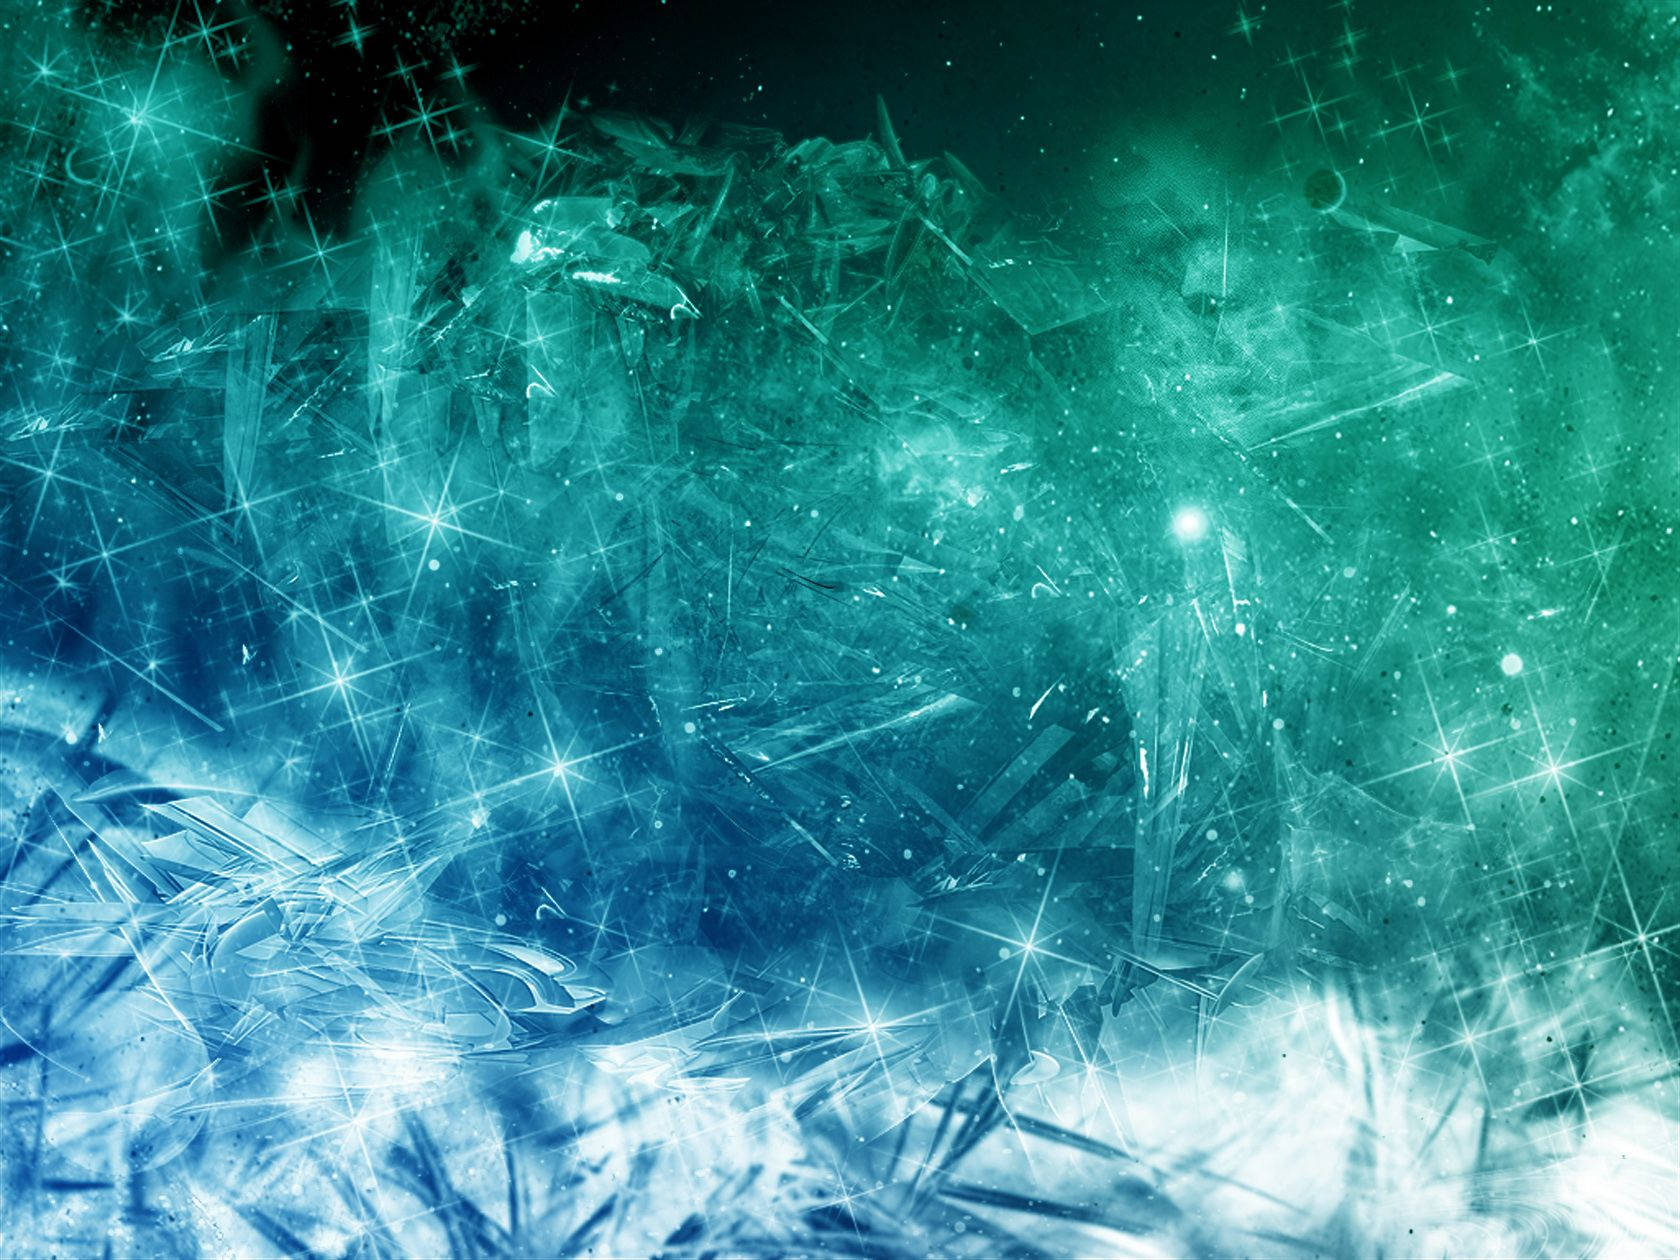 Sparkly Ice Crystals Background